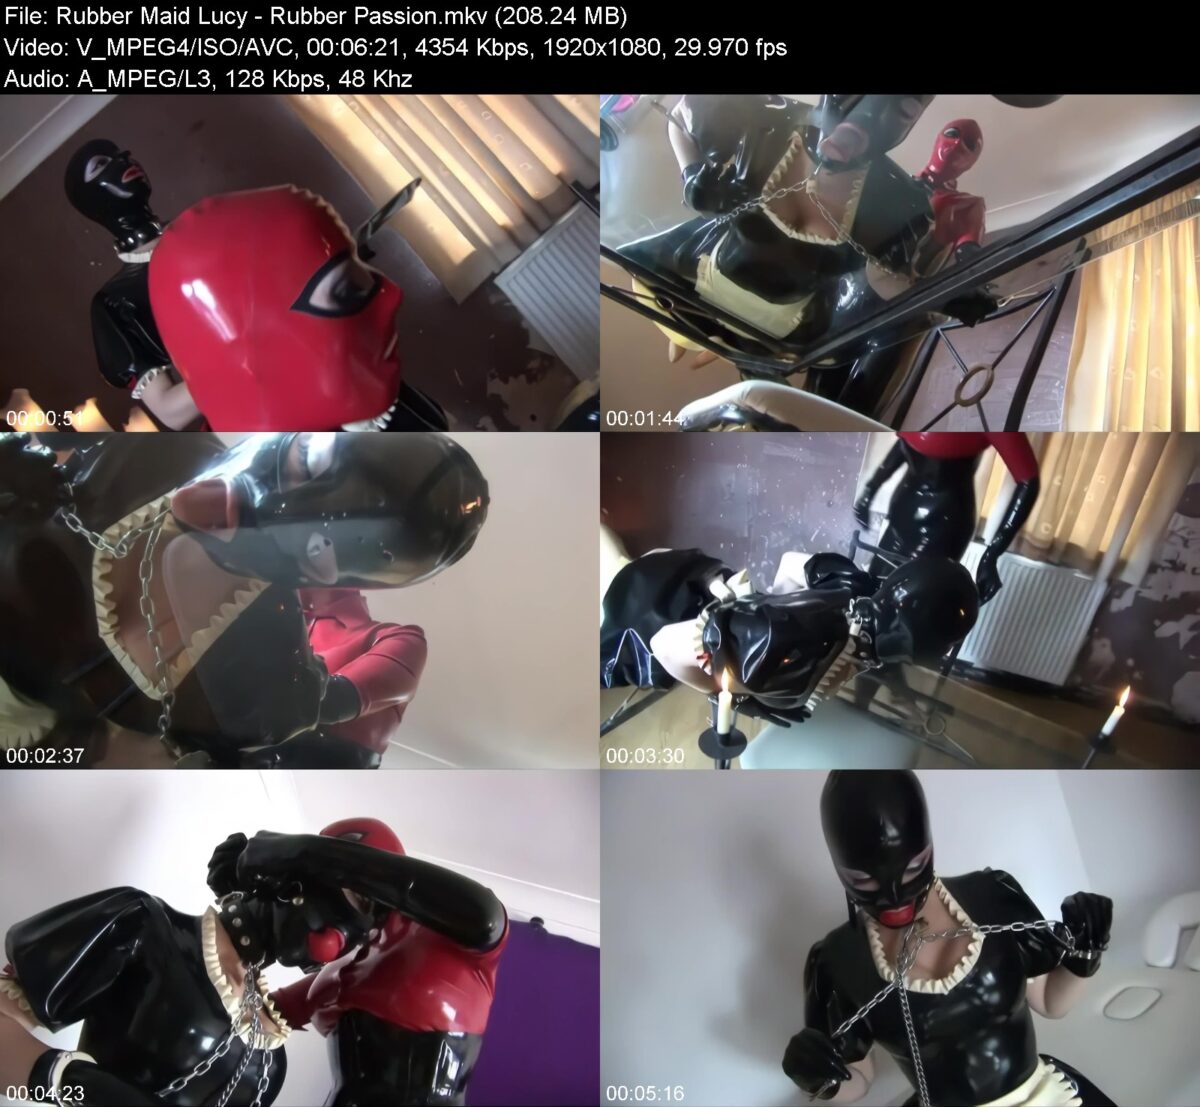 Rubber Maid Lucy - Rubber Passion